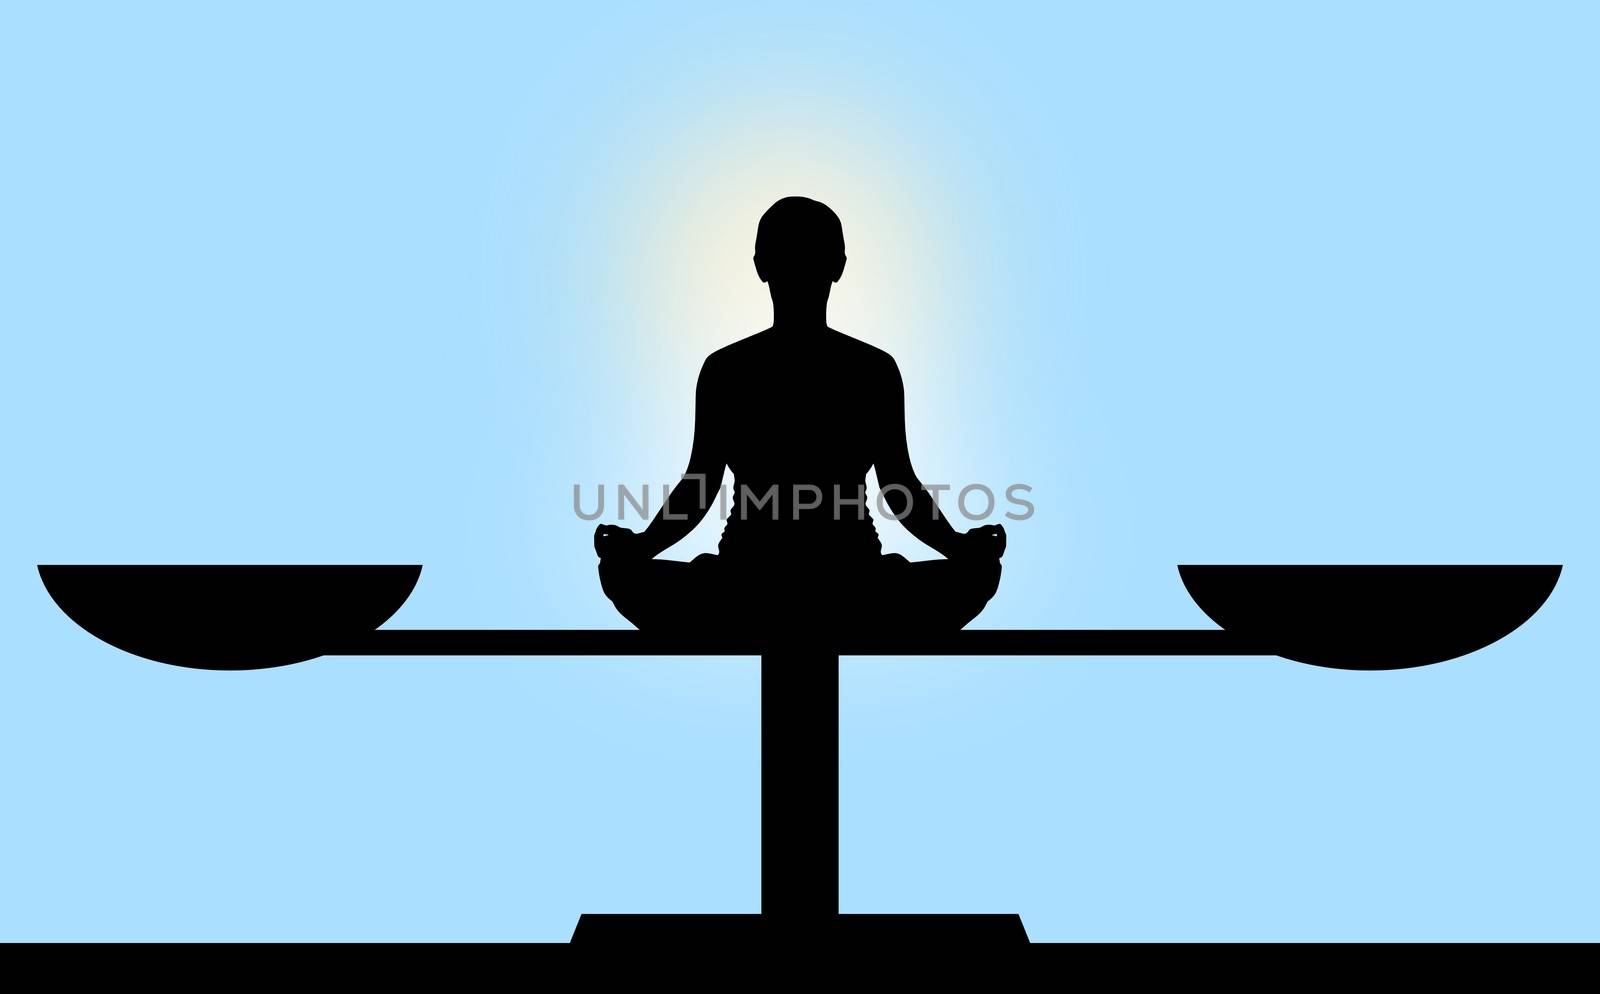 Illustration of a person sitting in the center of scales meditating